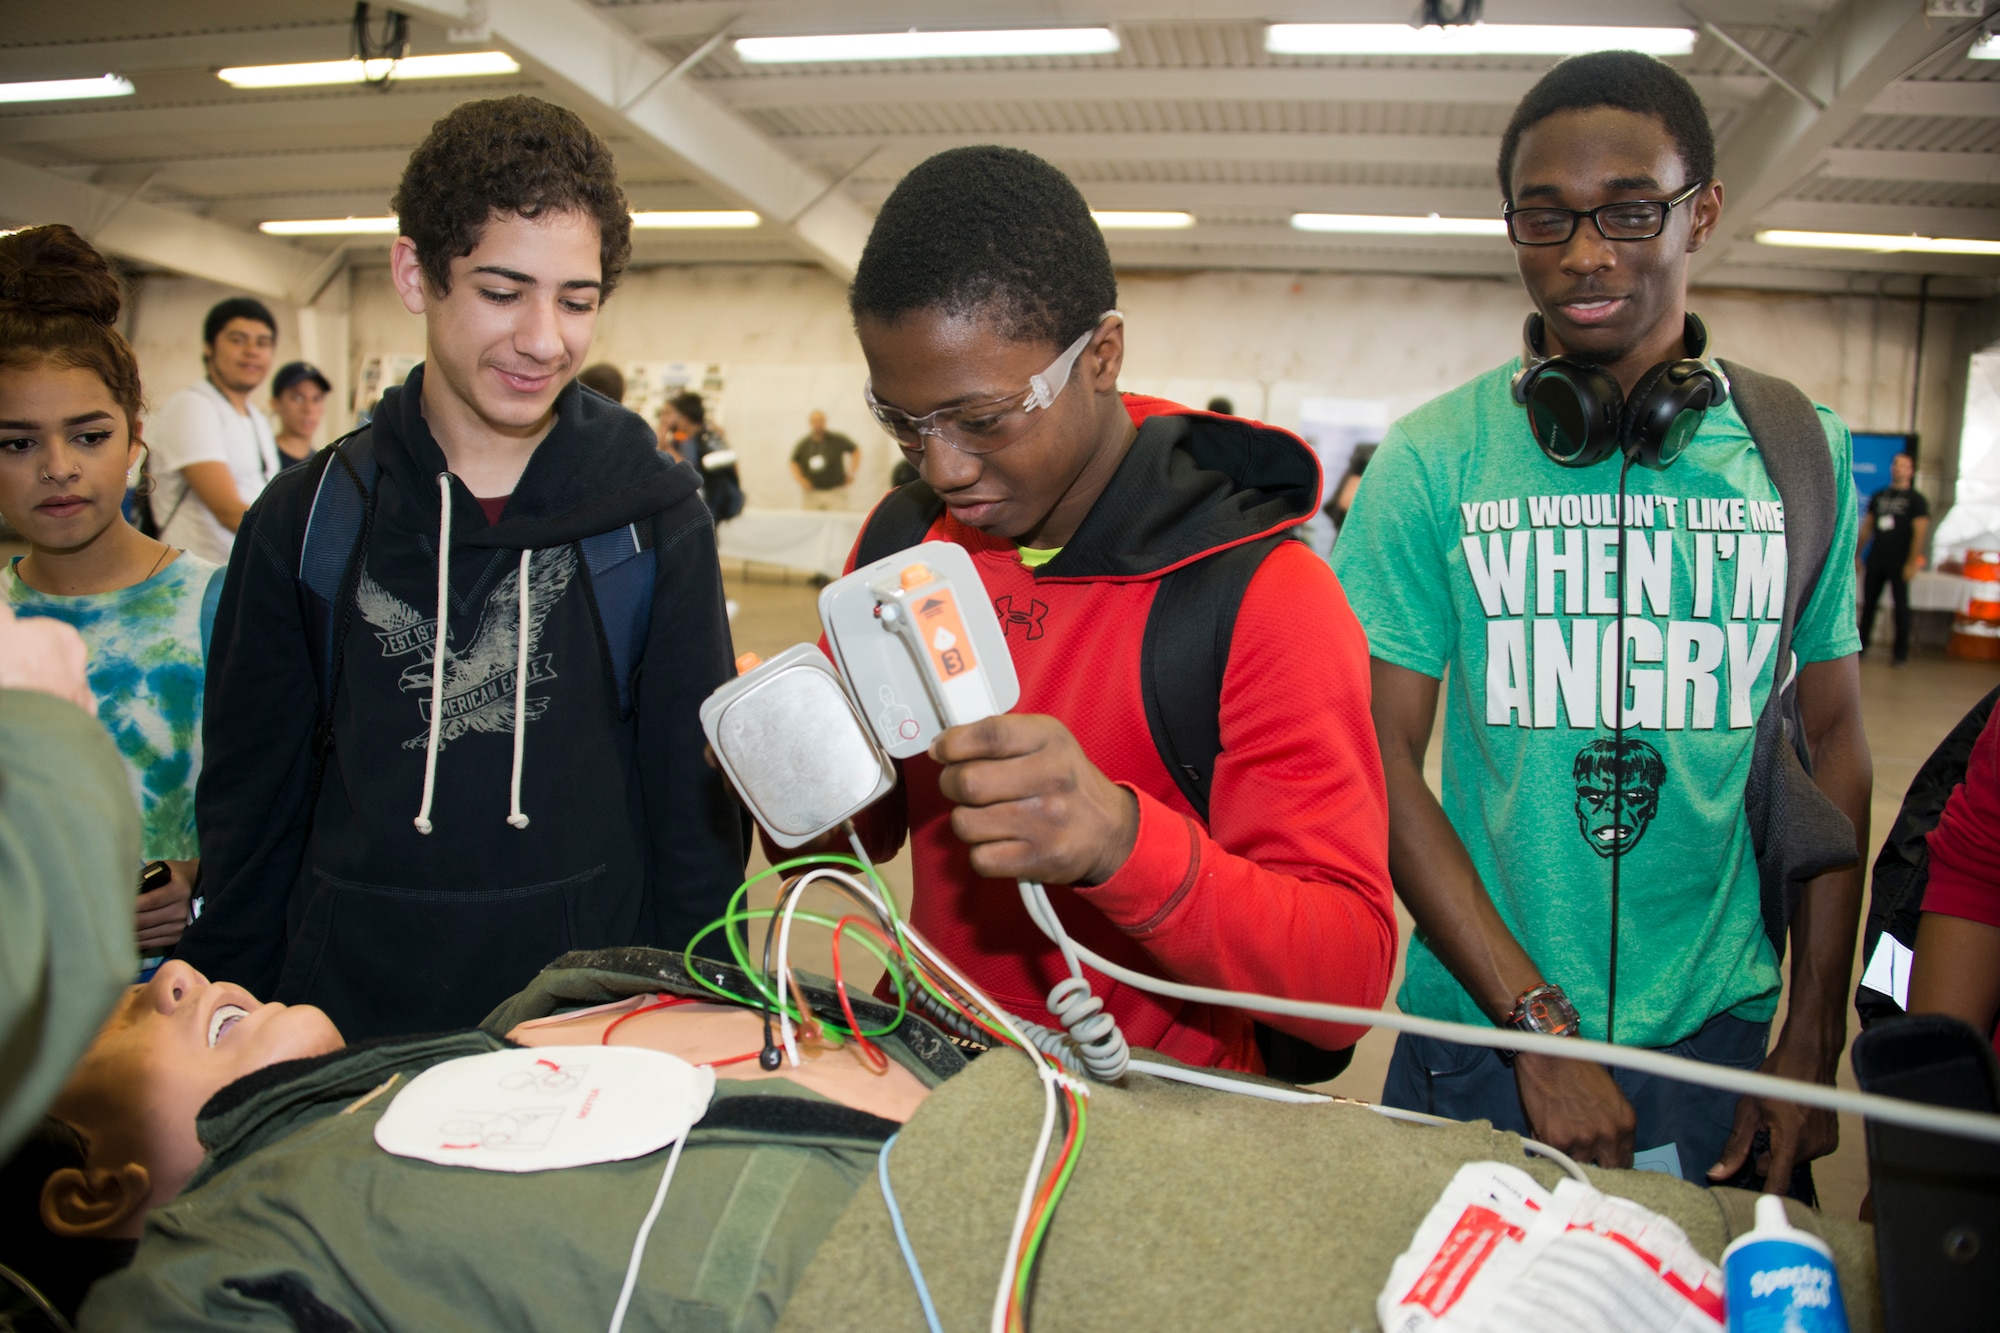 Students experiment with a HeartStart defibrillator on a medical mannequin at the Virginia Department of Transportation Career Fair at Prince William County Fairgrounds Oct. 8, 2015. The event, which drew more than 1,300 students from the Prince William County area, provided an opportunity for youths to learn about careers in the transportation industry. The 459th was on hand to discuss potential career paths as pilots, boom operators and inflight medics. (U.S. Air Force photo by Staff Sgt. Kat Justen)